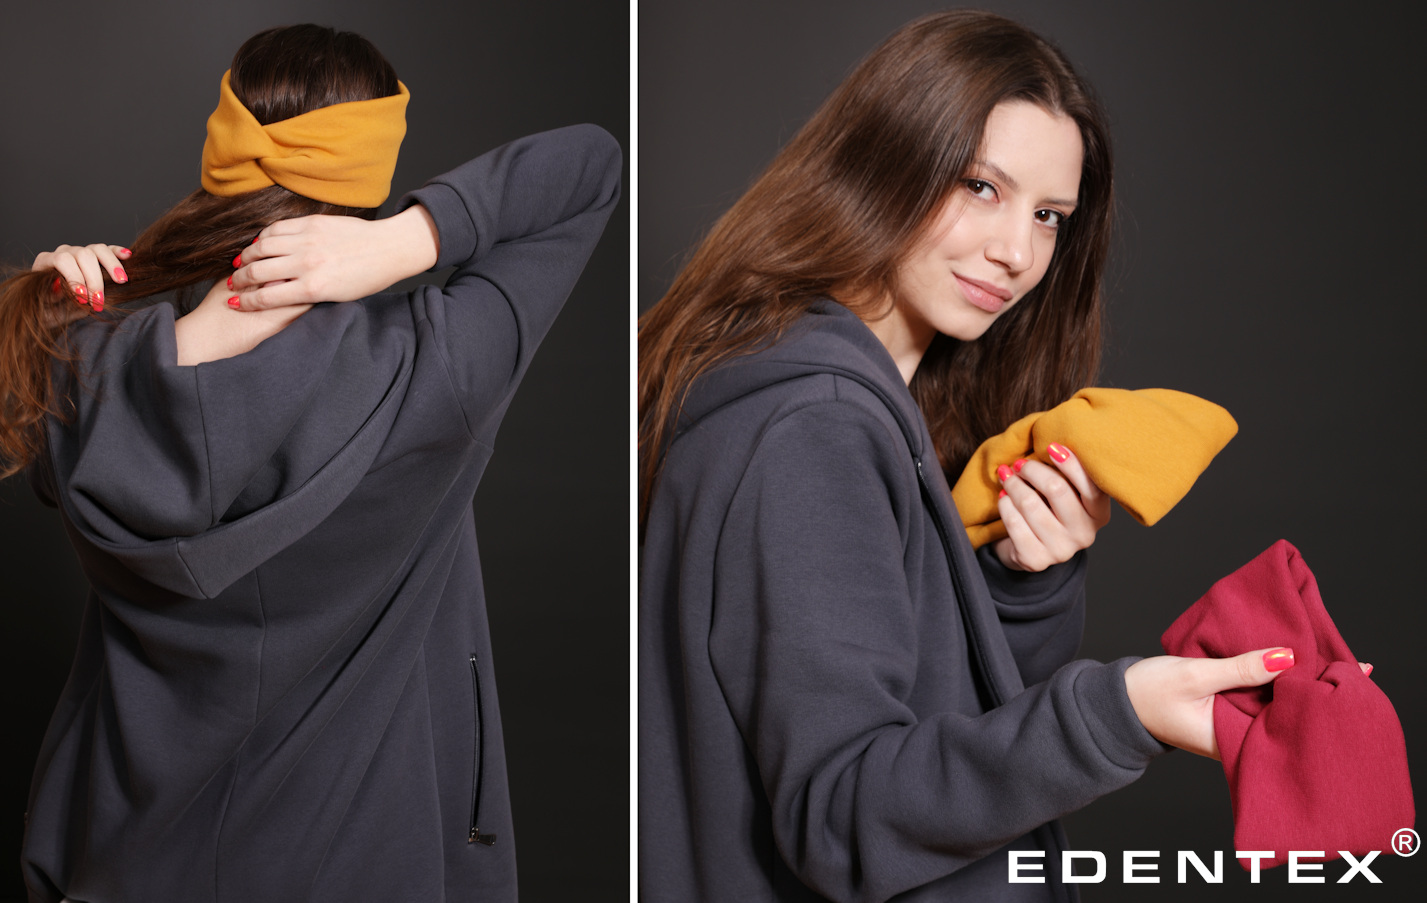 We create EDENTEX® cotton jersey fabrics for nature lovers filled with respect for its power and beauty, who don’t like to separate from it with absolutely anything